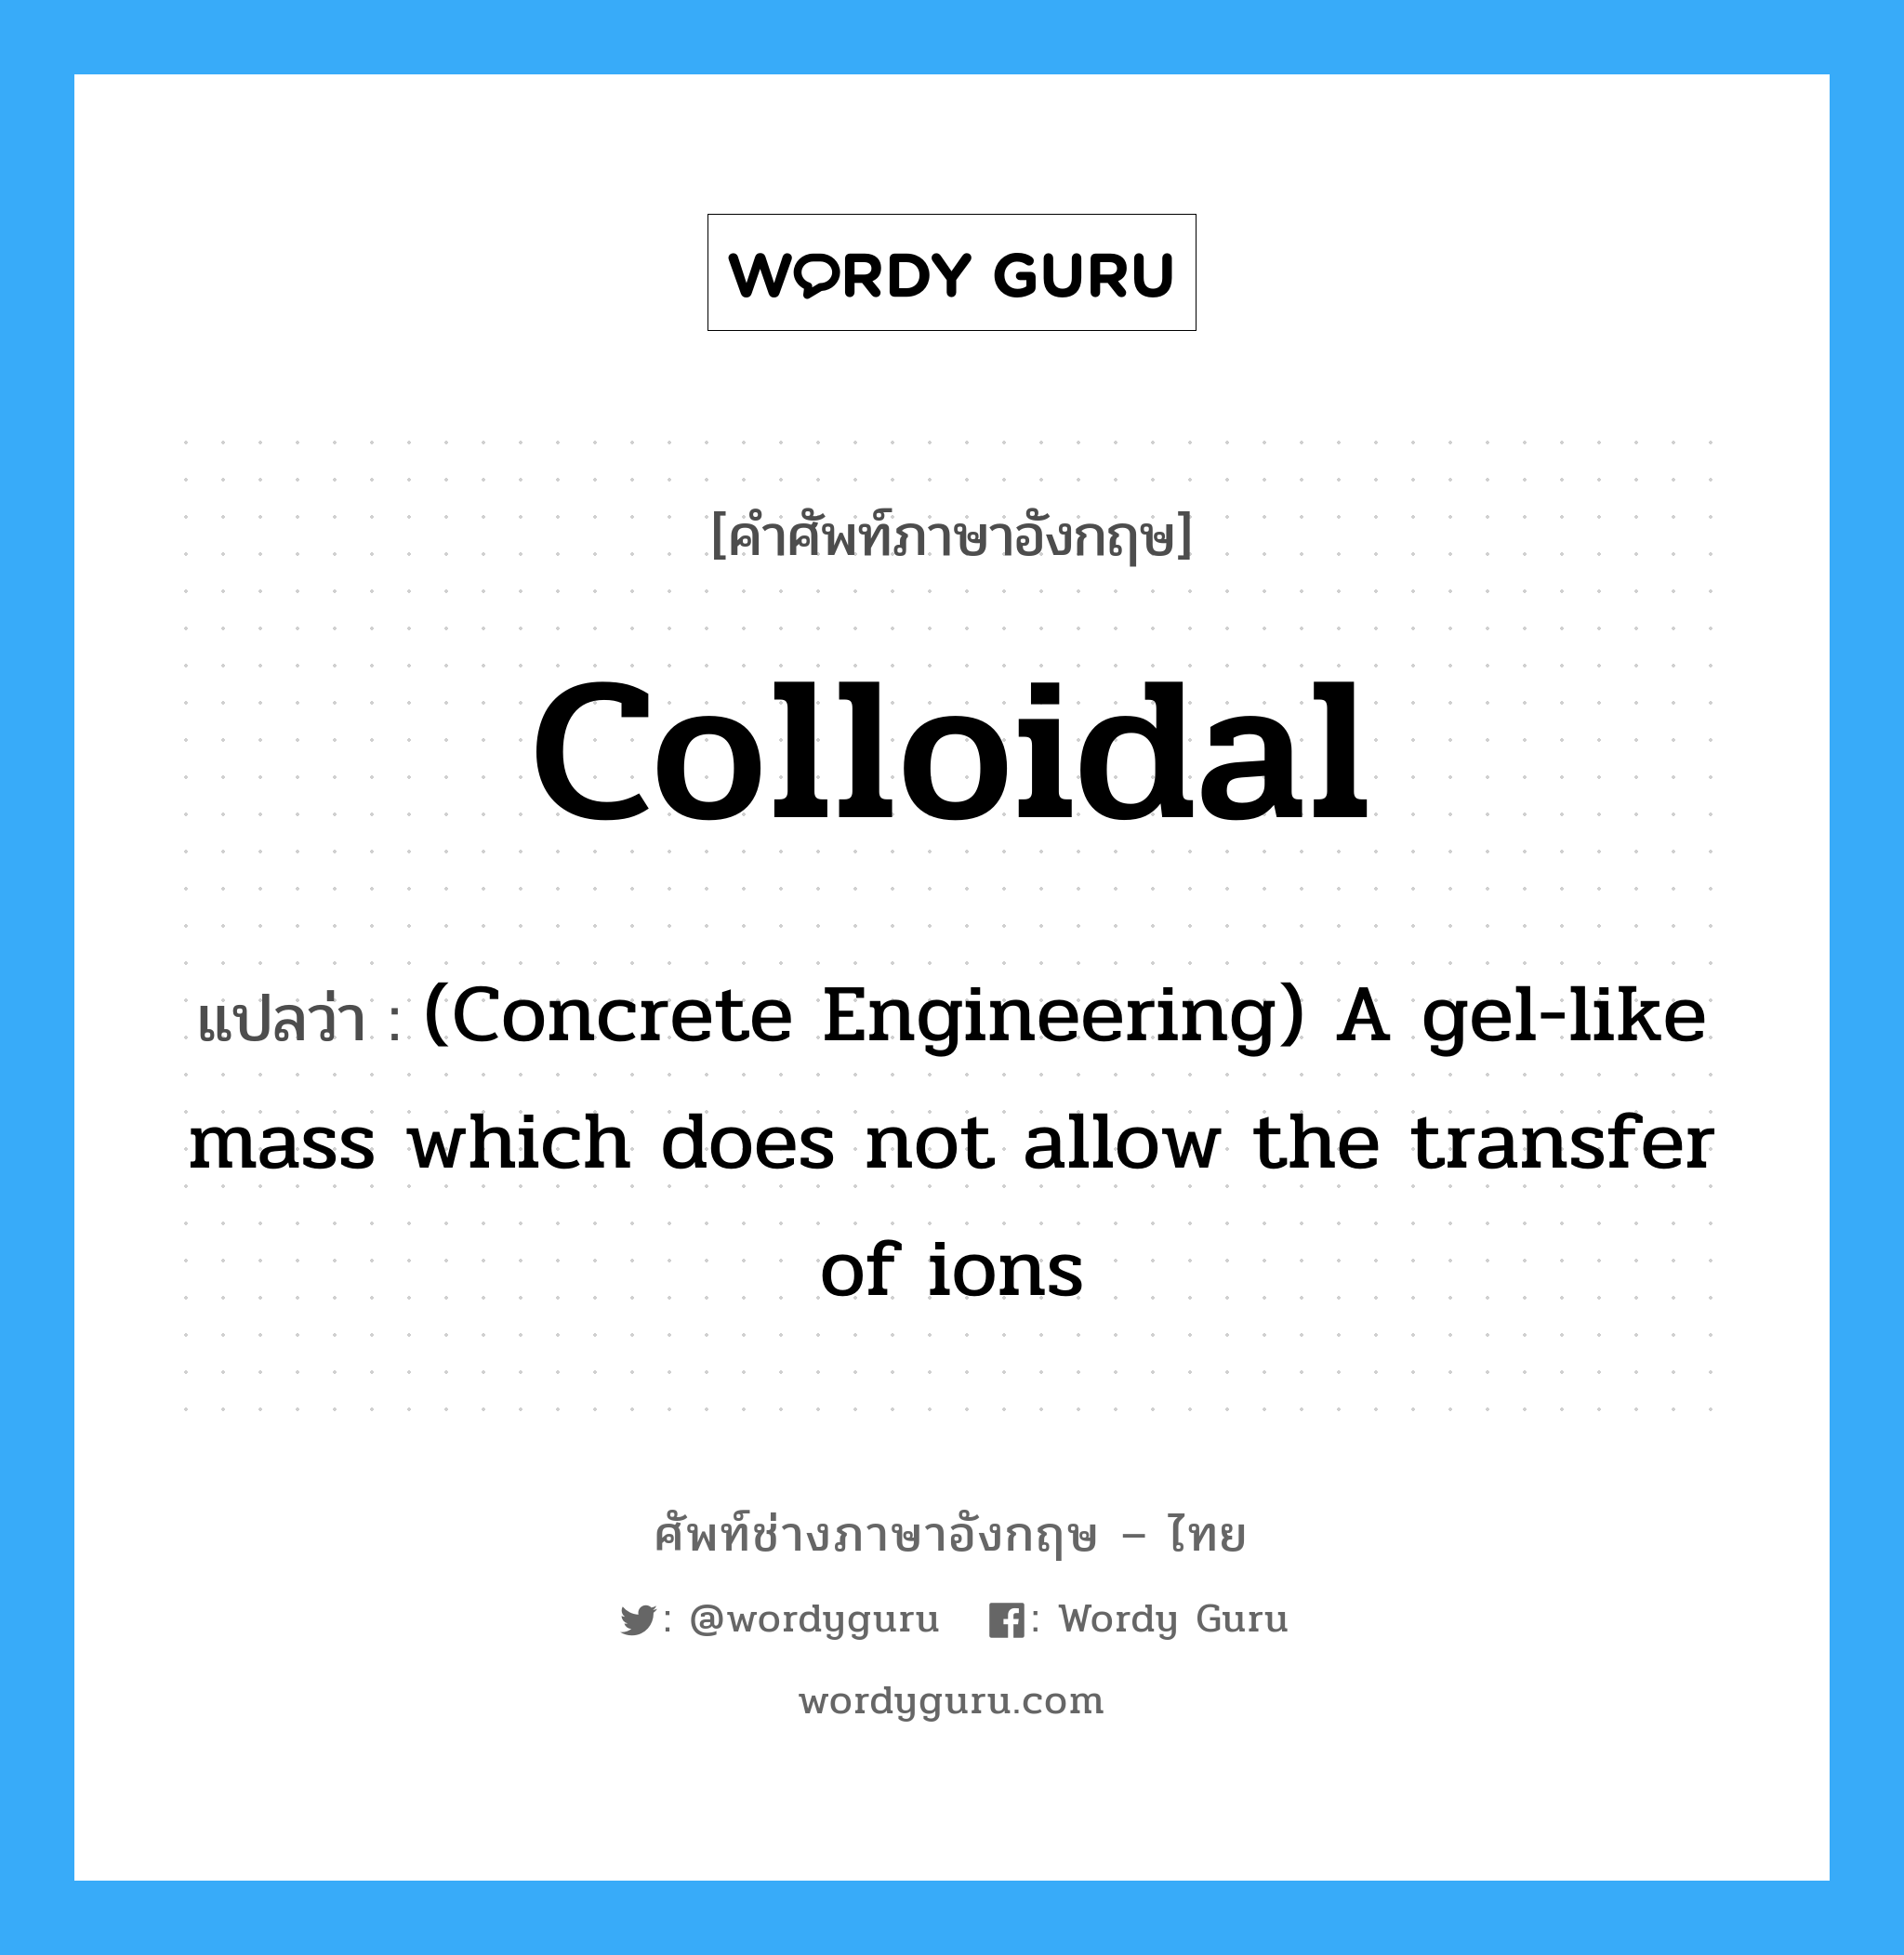 Colloidal แปลว่า?, คำศัพท์ช่างภาษาอังกฤษ - ไทย Colloidal คำศัพท์ภาษาอังกฤษ Colloidal แปลว่า (Concrete Engineering) A gel-like mass which does not allow the transfer of ions